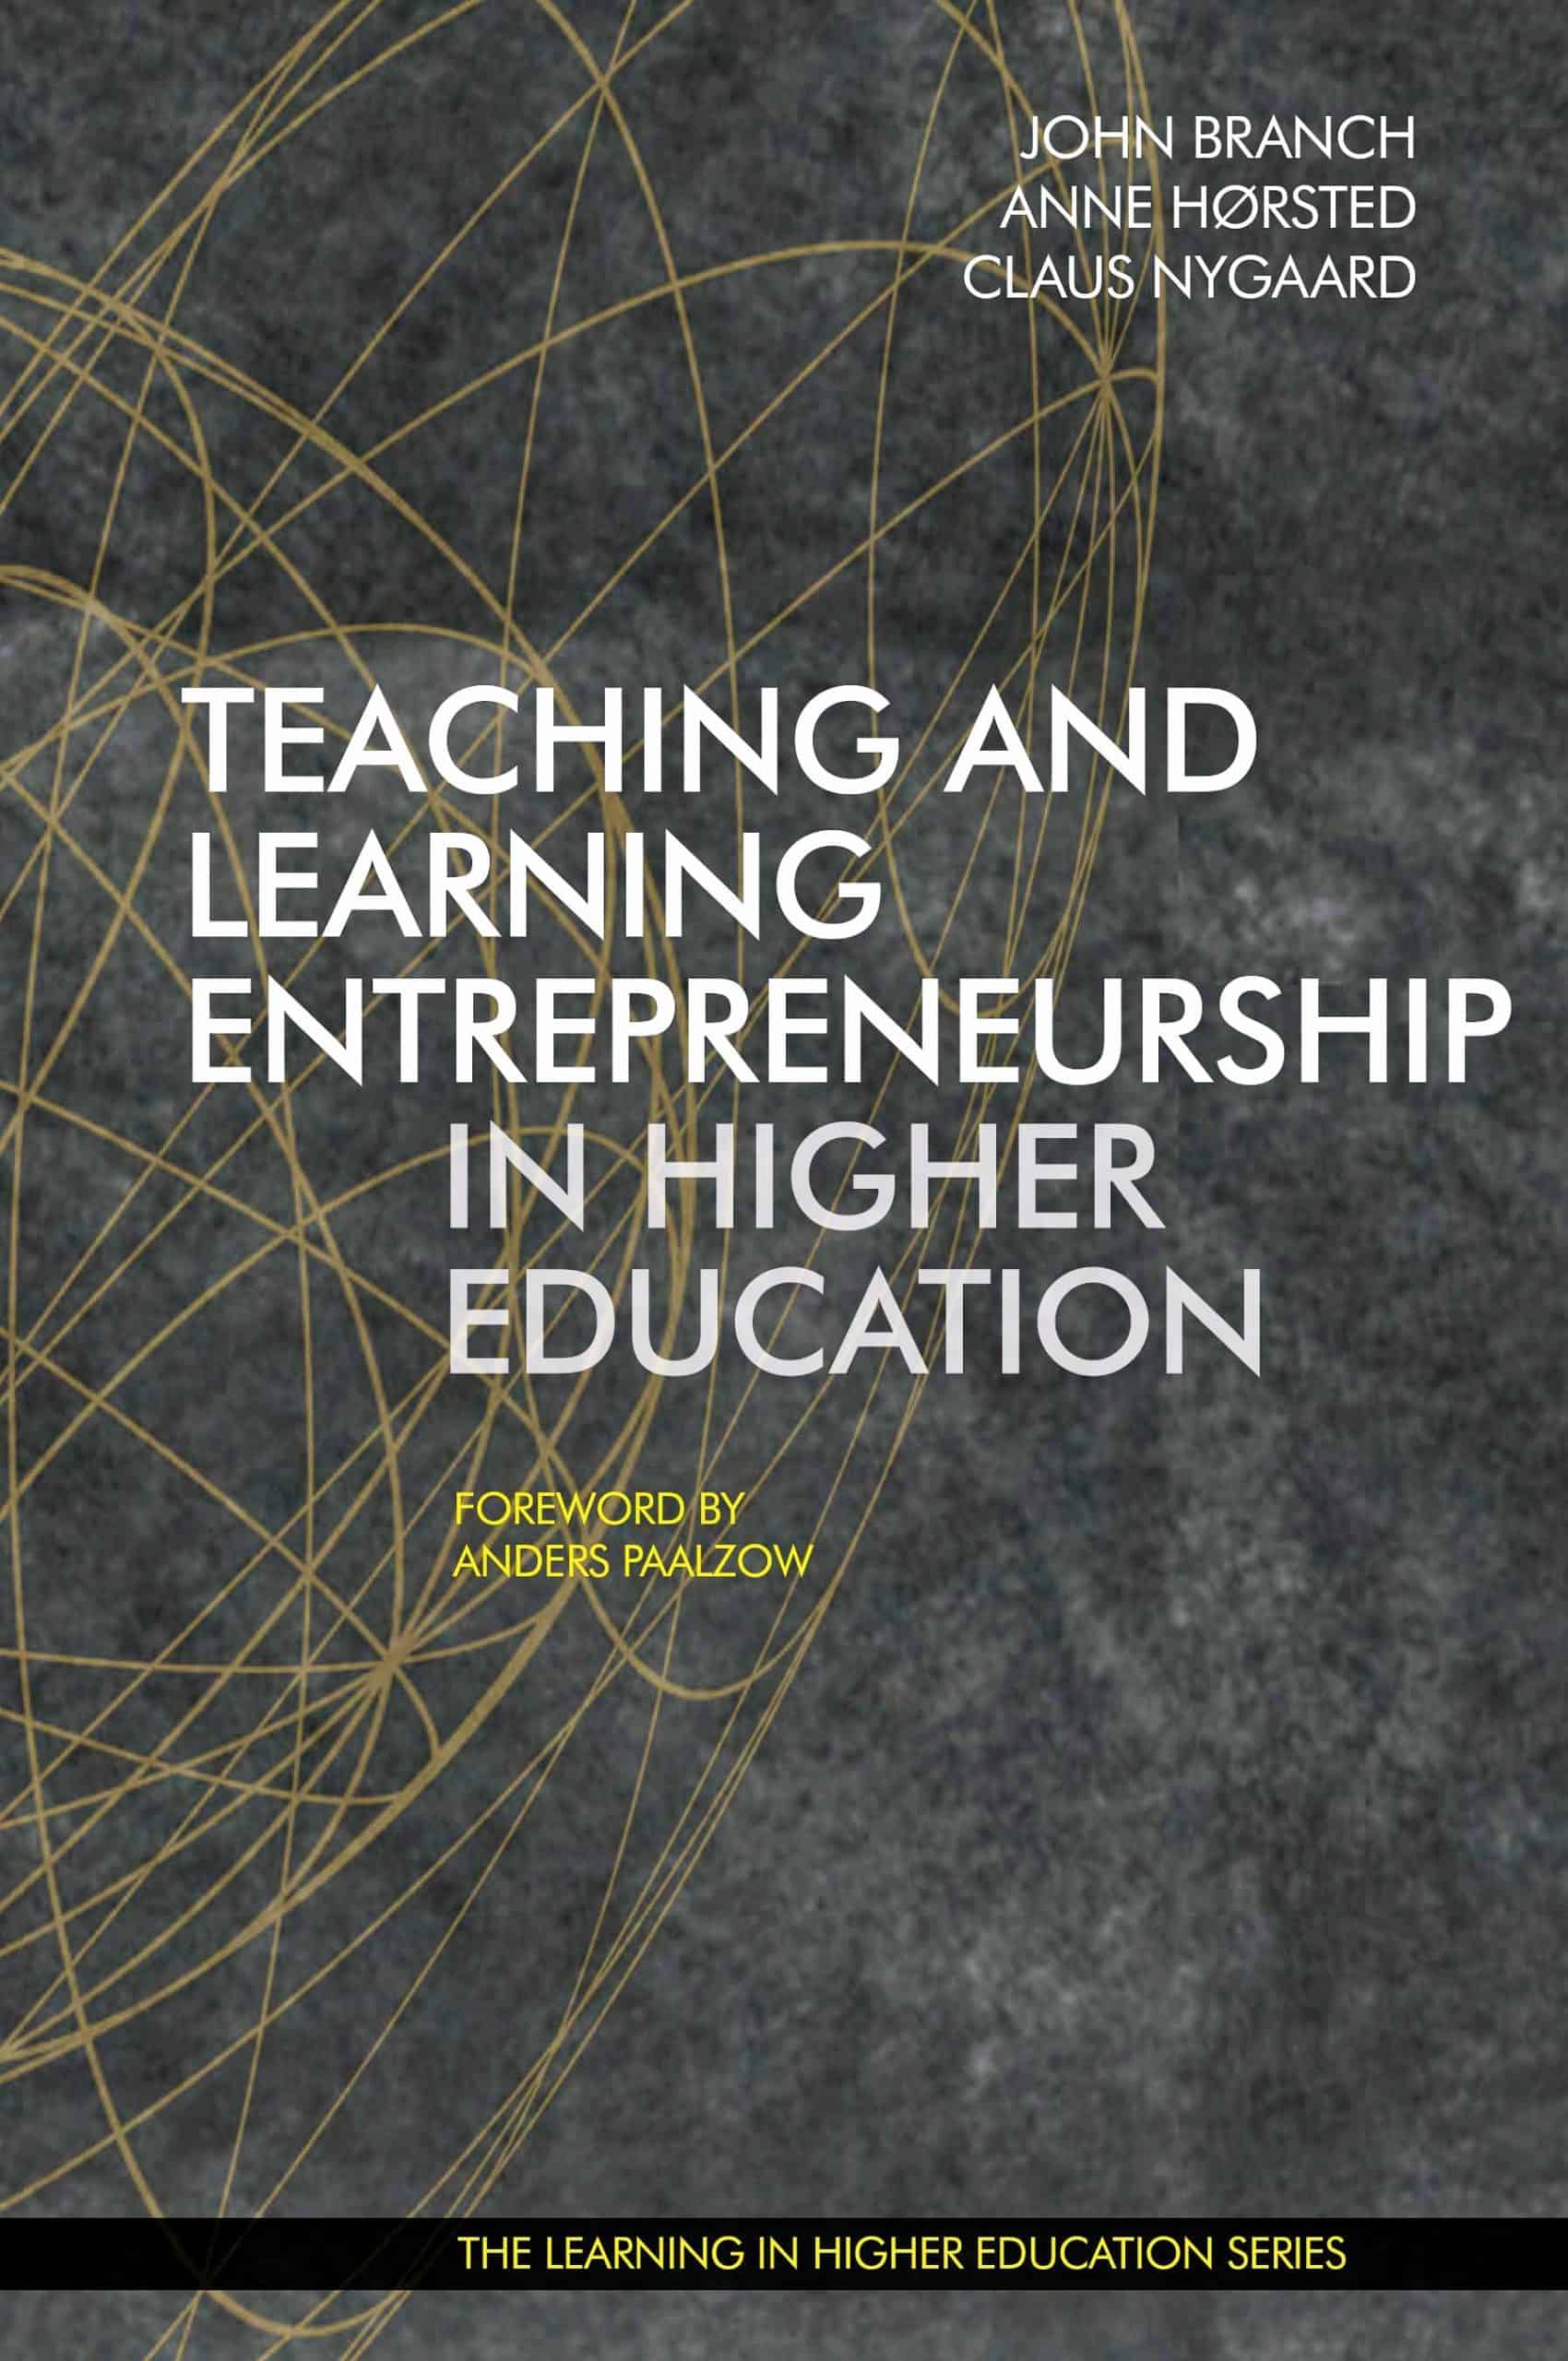 Teaching and Learning Entrepreneurship in Higher Education (2017) - John Branch - Anne Hørsted - Claus Nygaard - Anders Paalzow - SSERiga - Stockholm School of Economics Riga - Institute for Learning in Higher Education - Libri Publishing Ltd